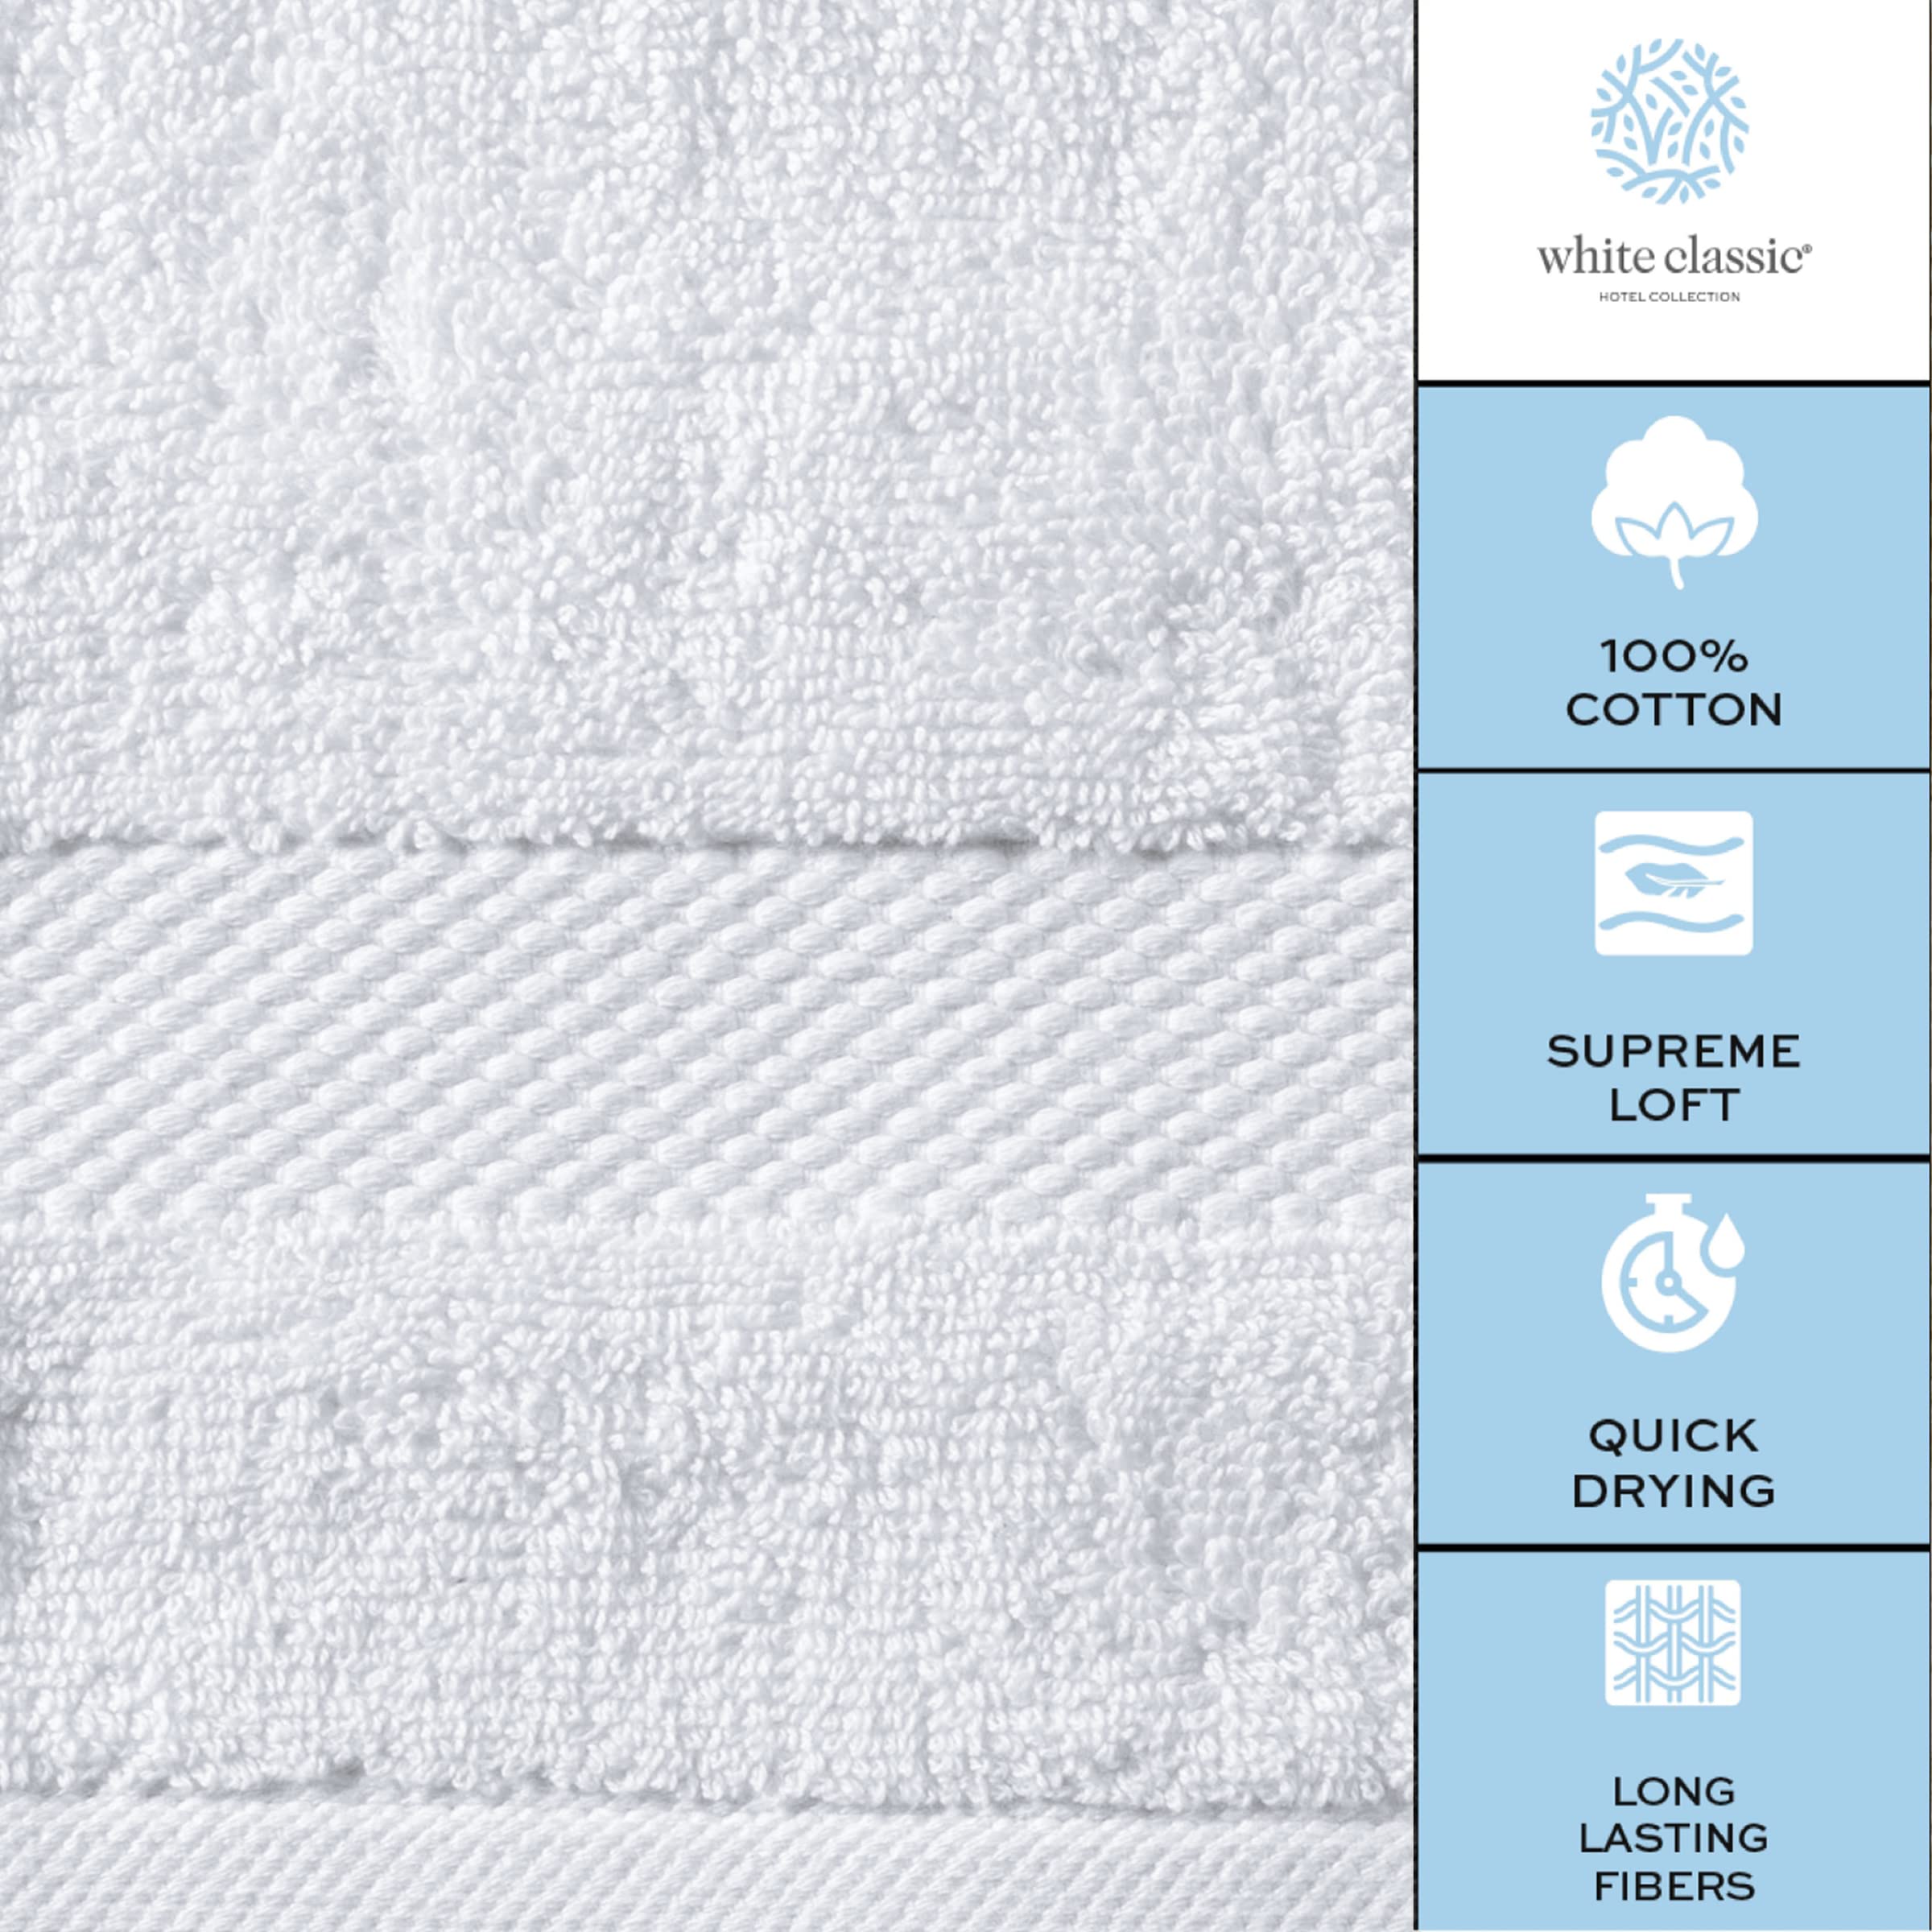 Luxury 8 Piece Bath Towel Set White - 700 GSM Thick Combed Cotton Hotel Quality Towels - 2 Bath Towels, 2 Hand Towels, 4 Washcloths  - Acceptable